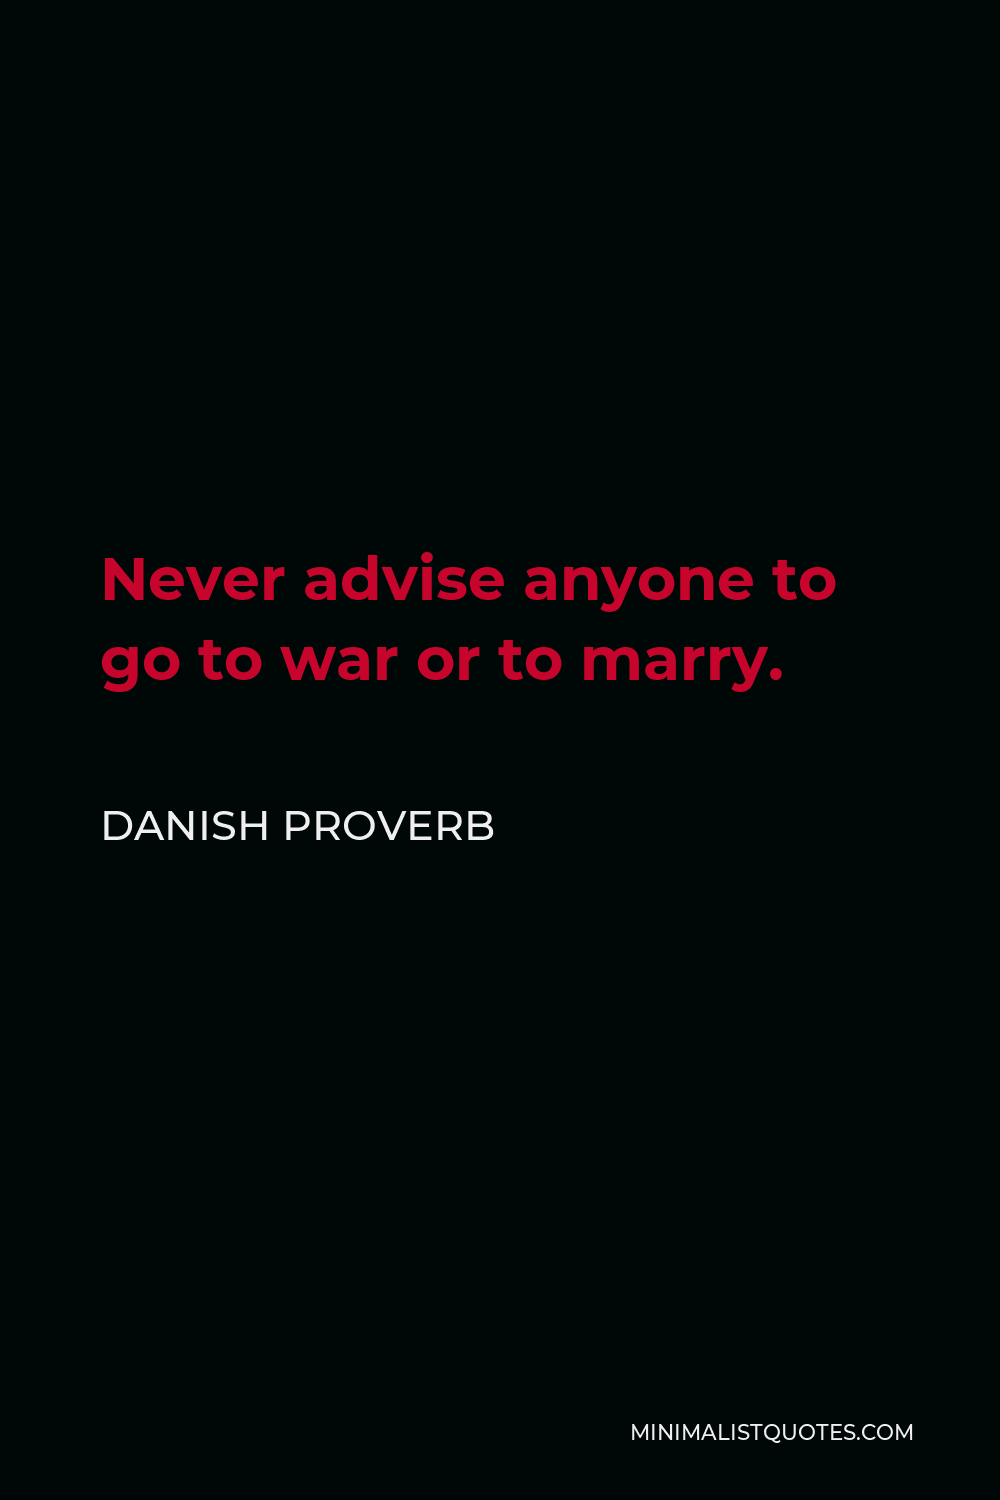 Danish Proverb Quote - Never advise anyone to go to war or to marry.